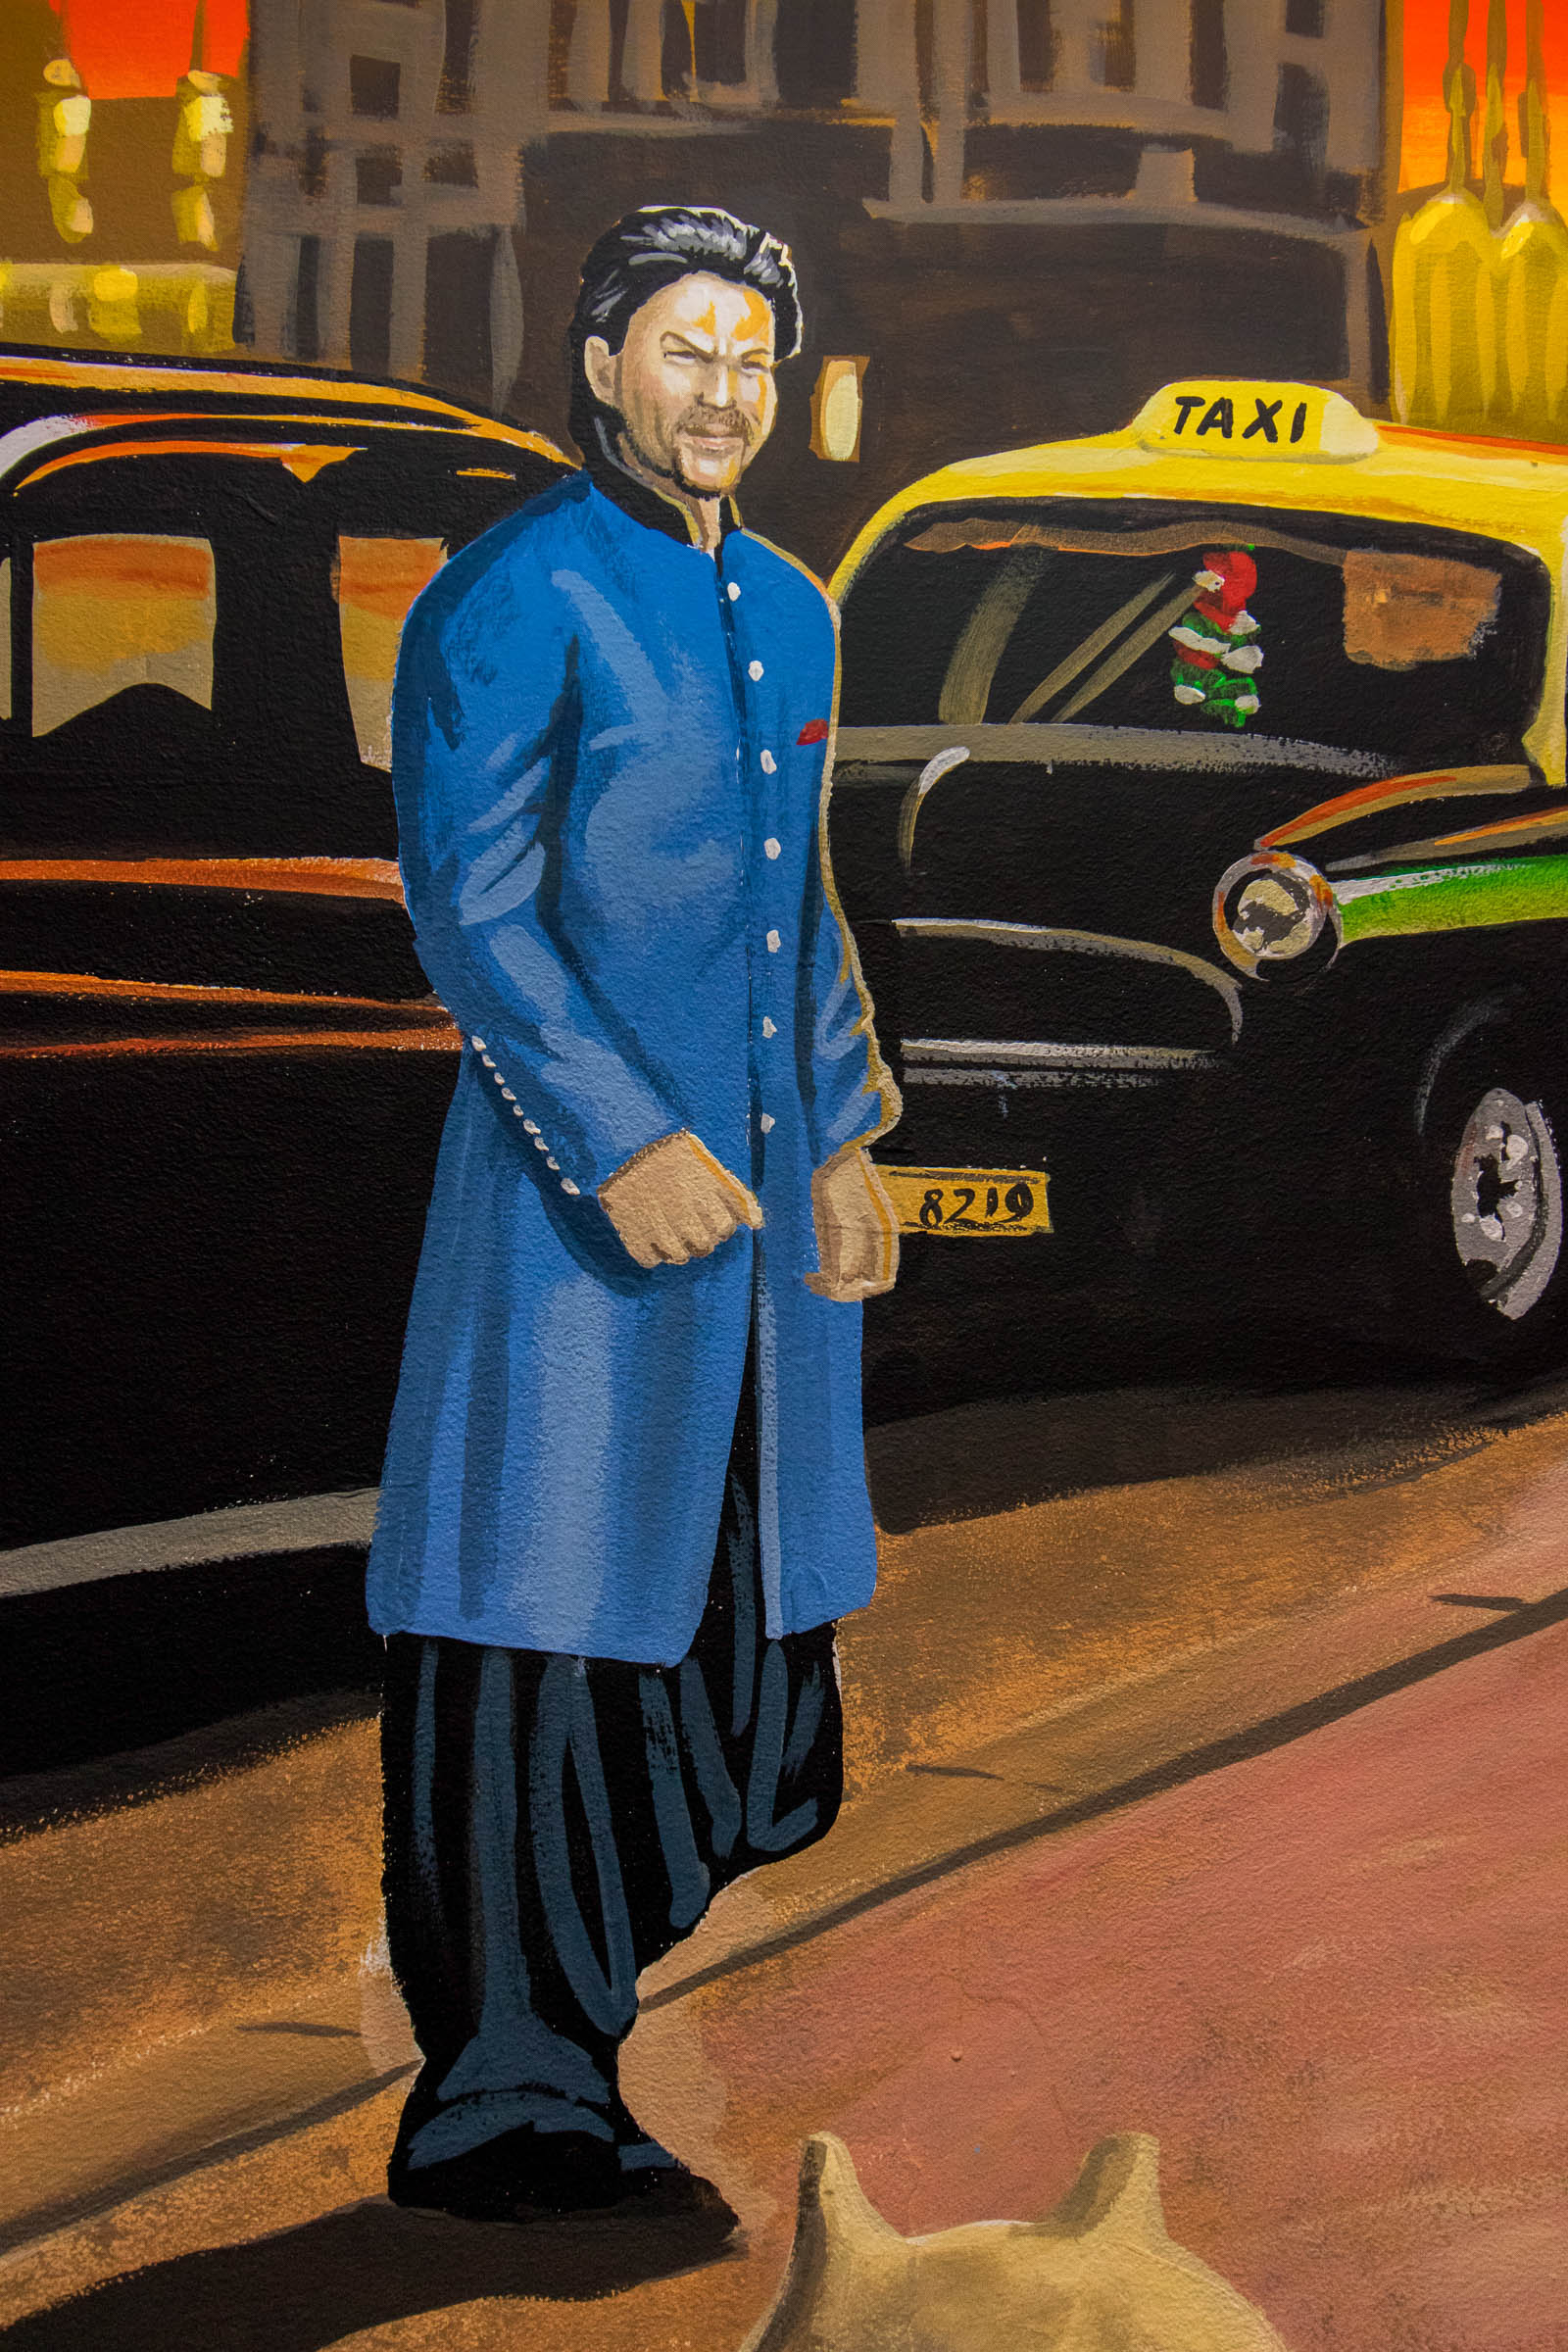 Aladin Mural Restaurant in Brick Lane - and lastly Shah Rukh Khan in finery cloth